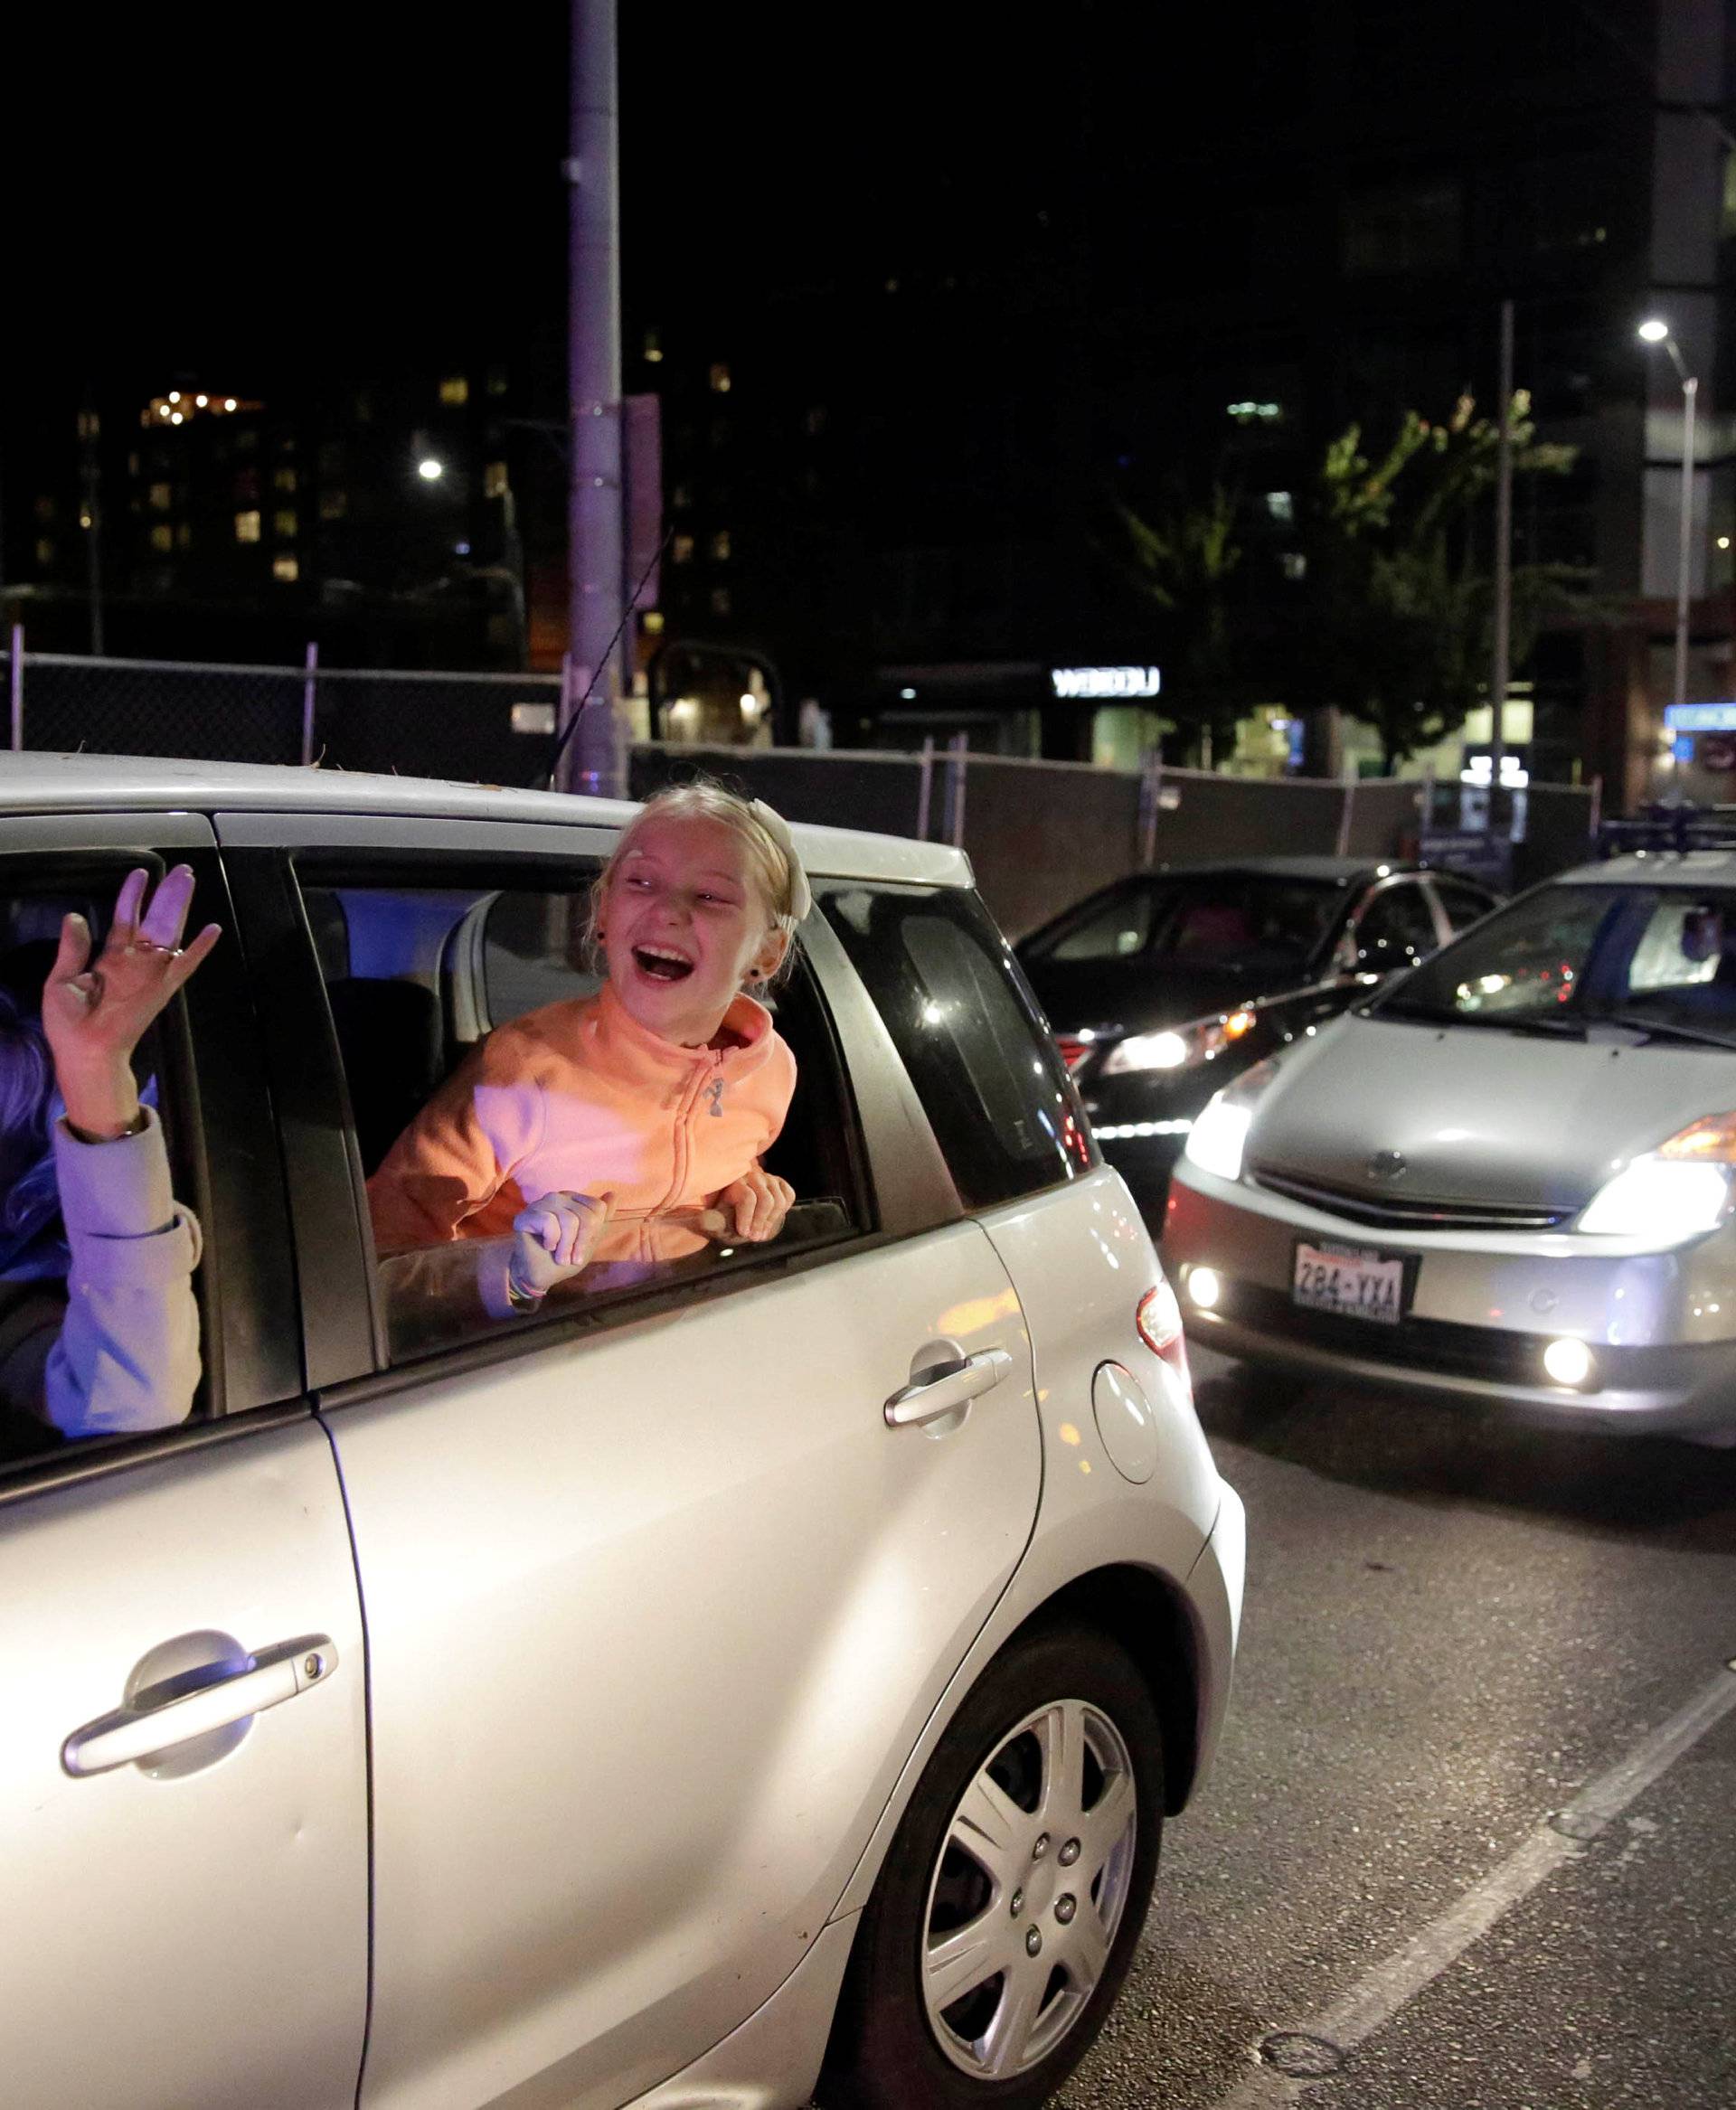 People stuck in traffic react to a protest to the election of Republican Donald Trump as the president of the United States in Seattle, Washington